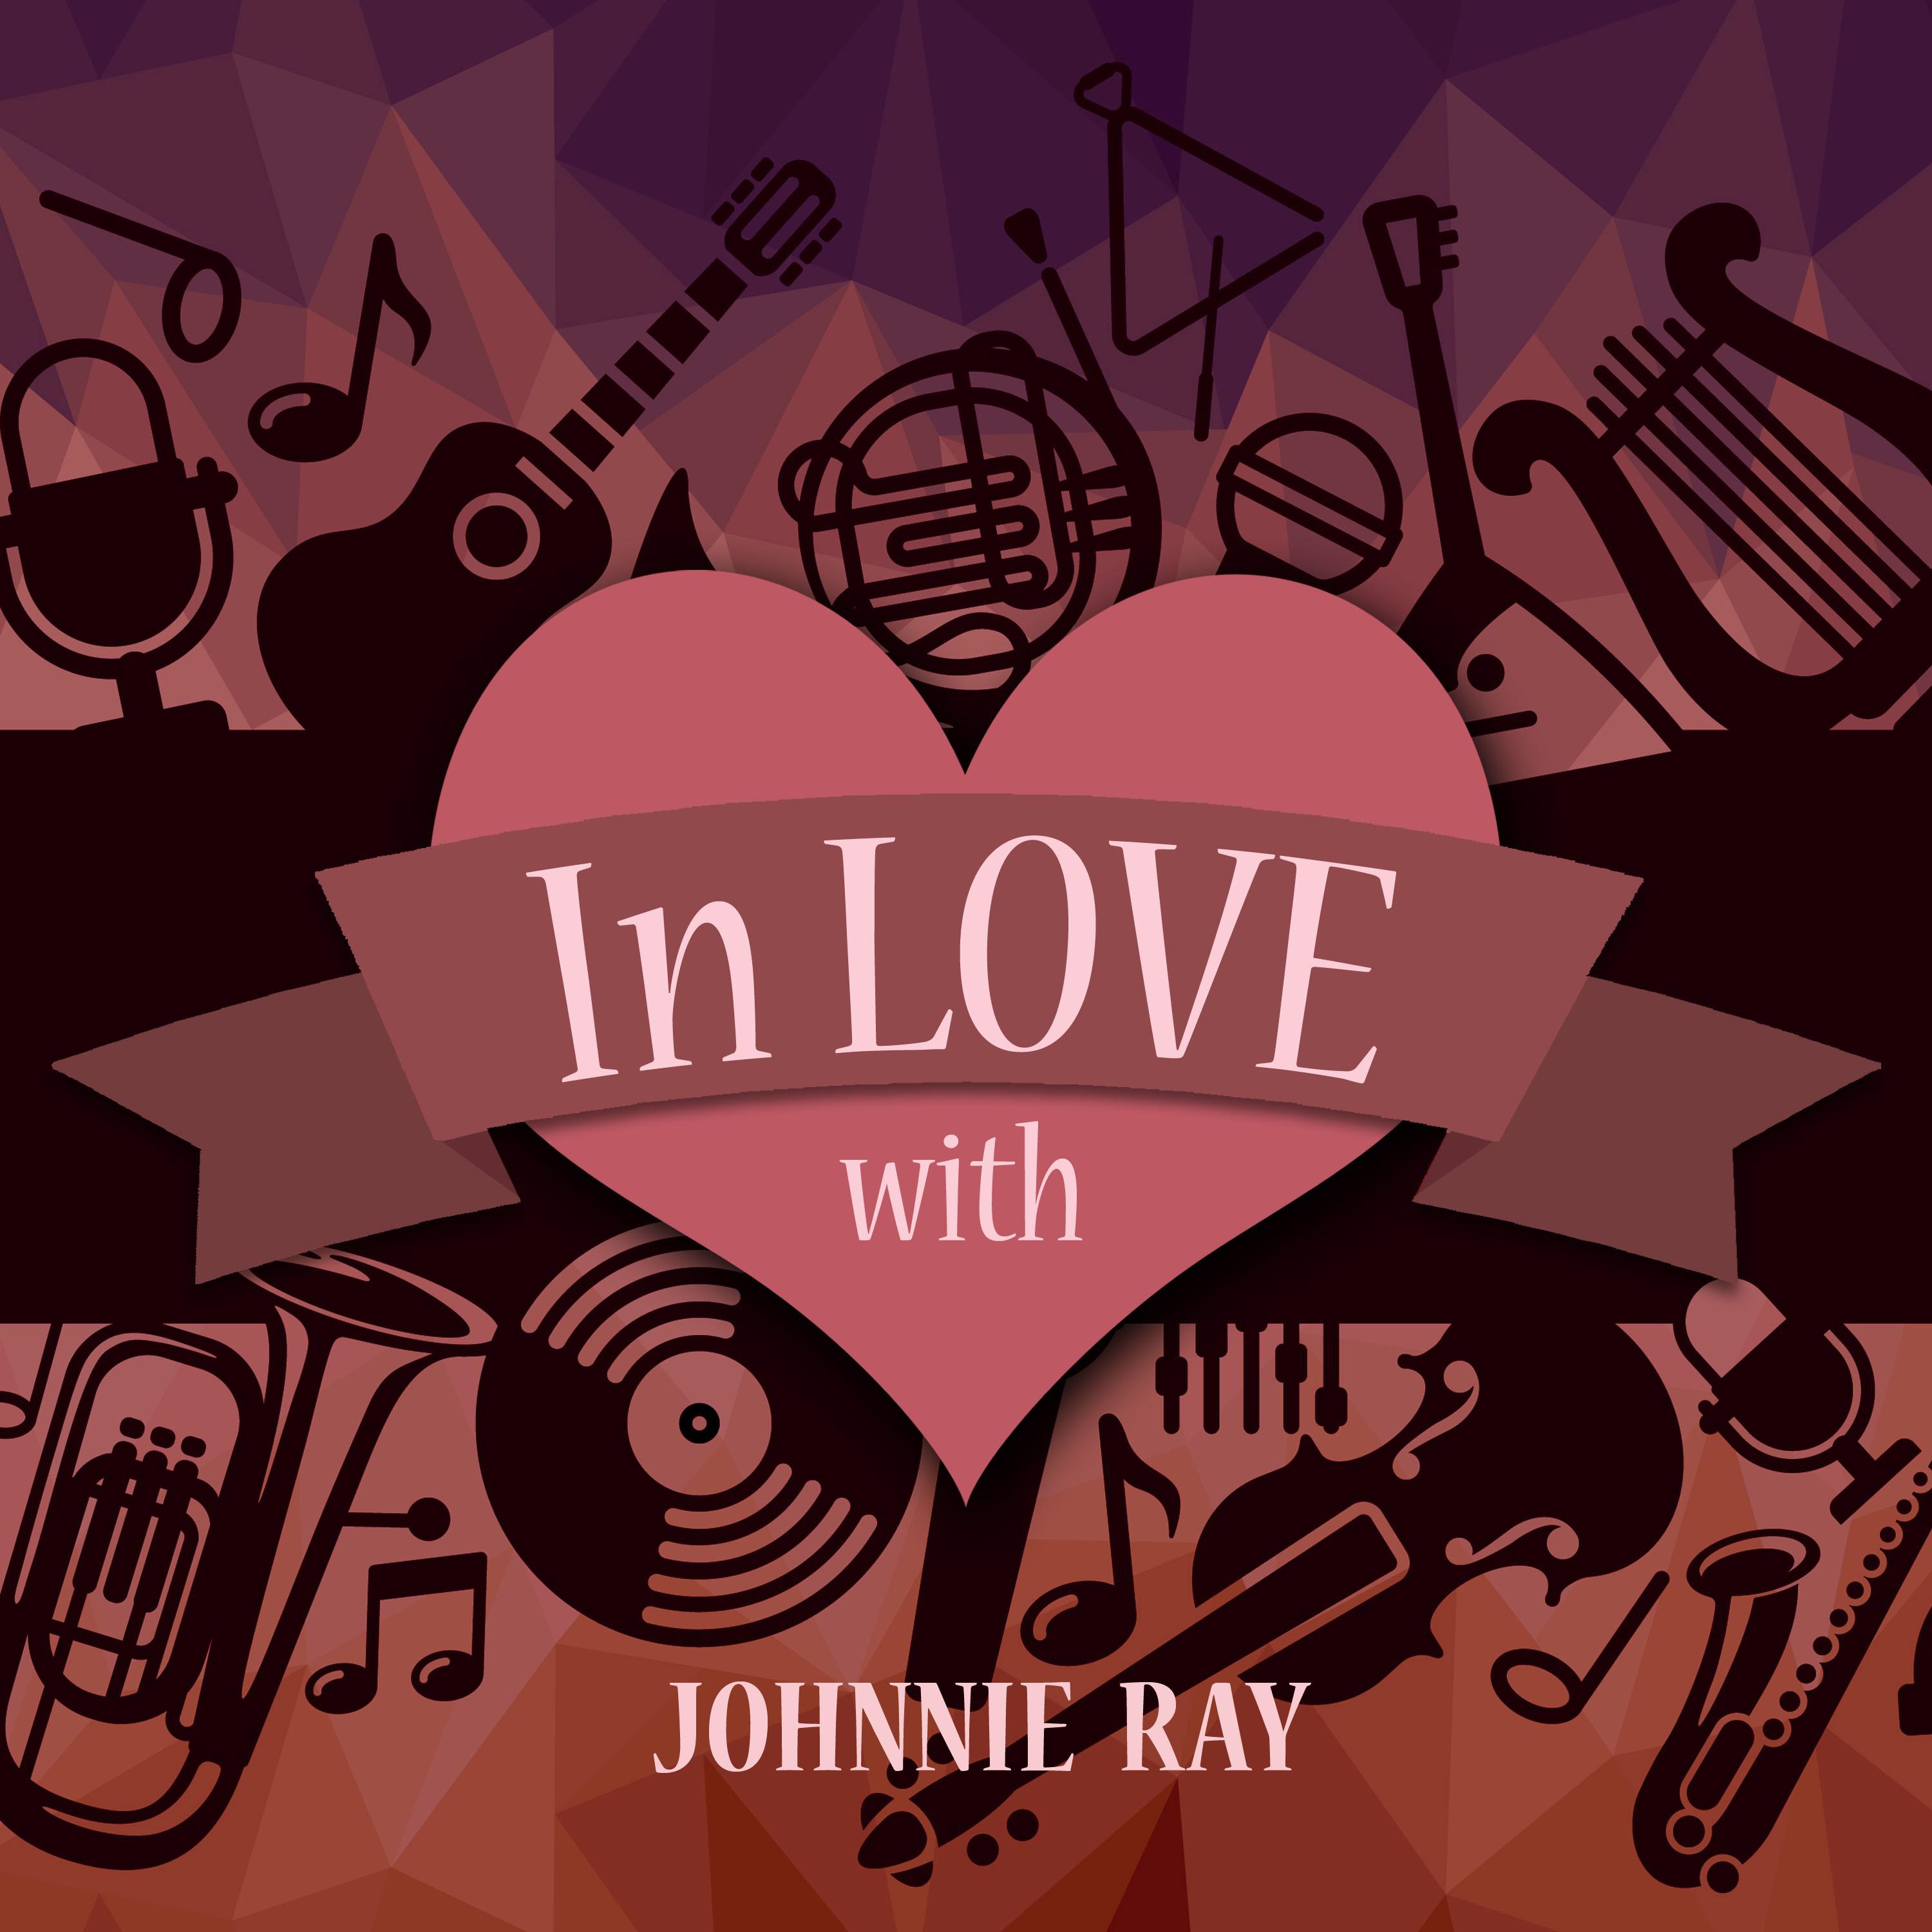 In Love with Johnnie Ray